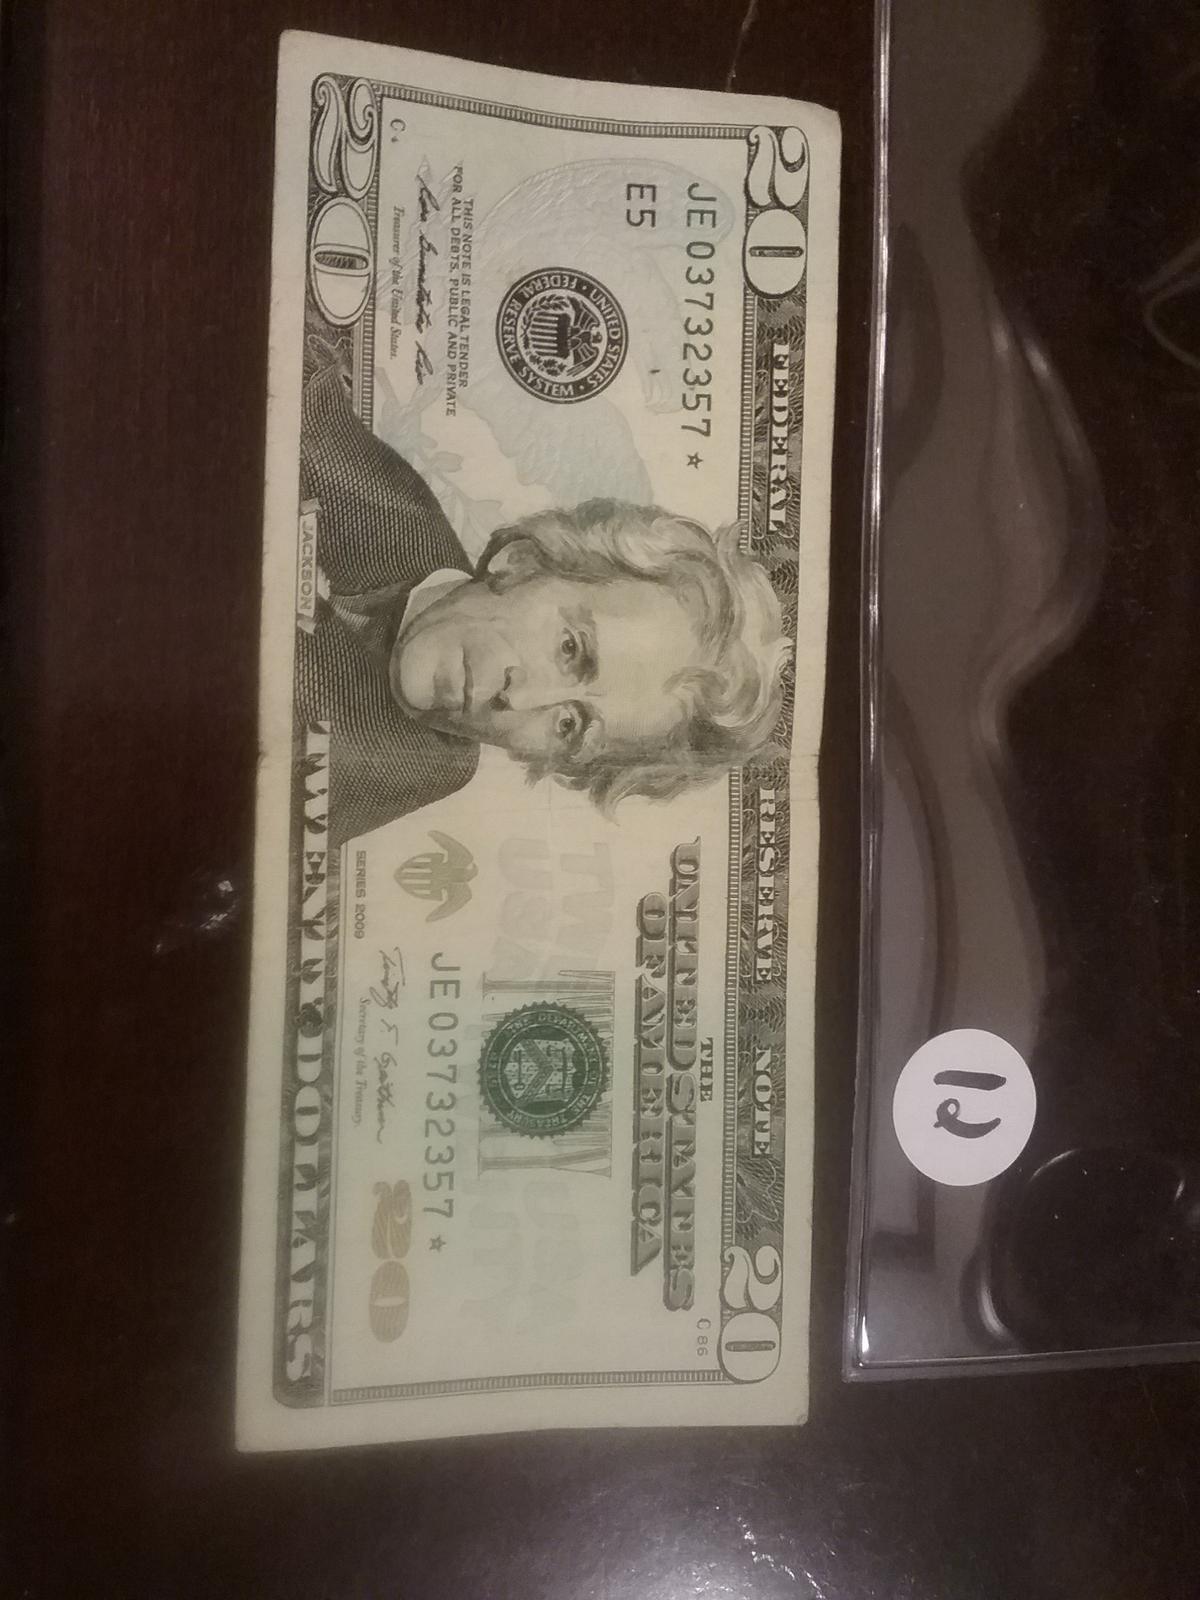 2009 $20 Star Note, about uncirculated